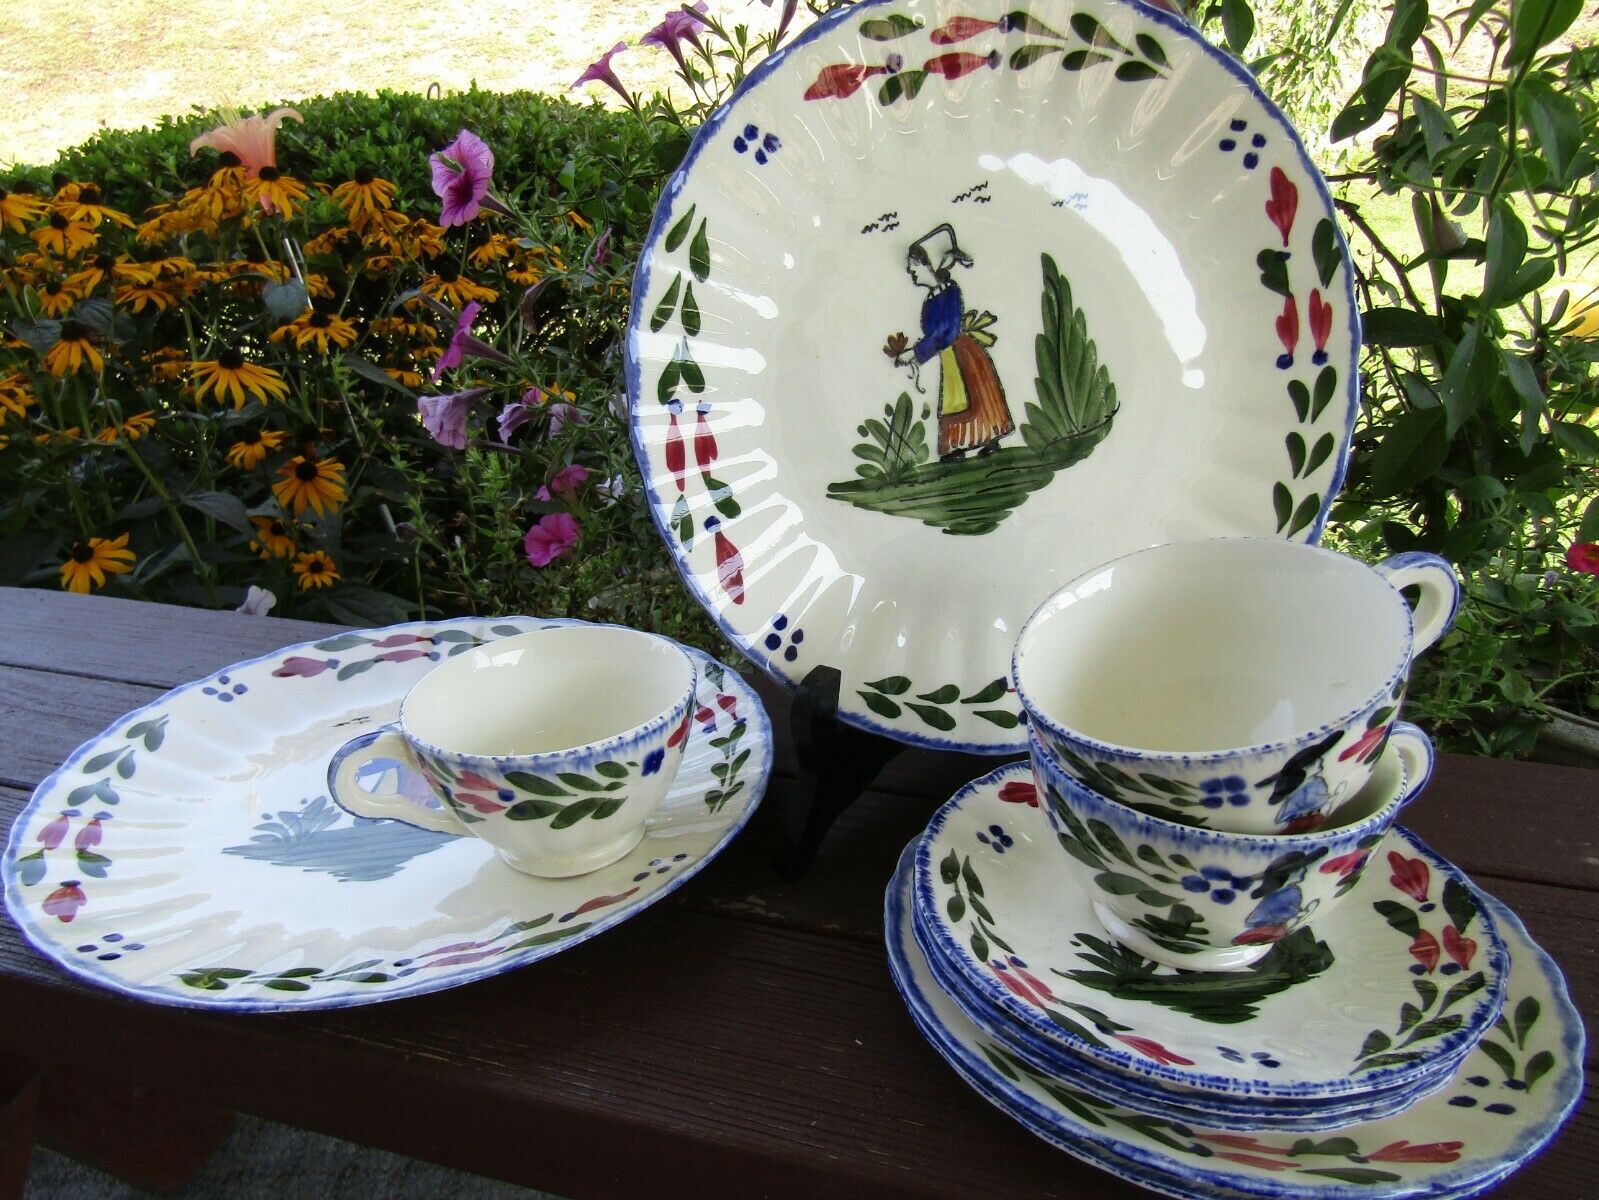 10 Pc Blue Ridge Southern Potteries French Peasant Plates,salad,cups & Saucers